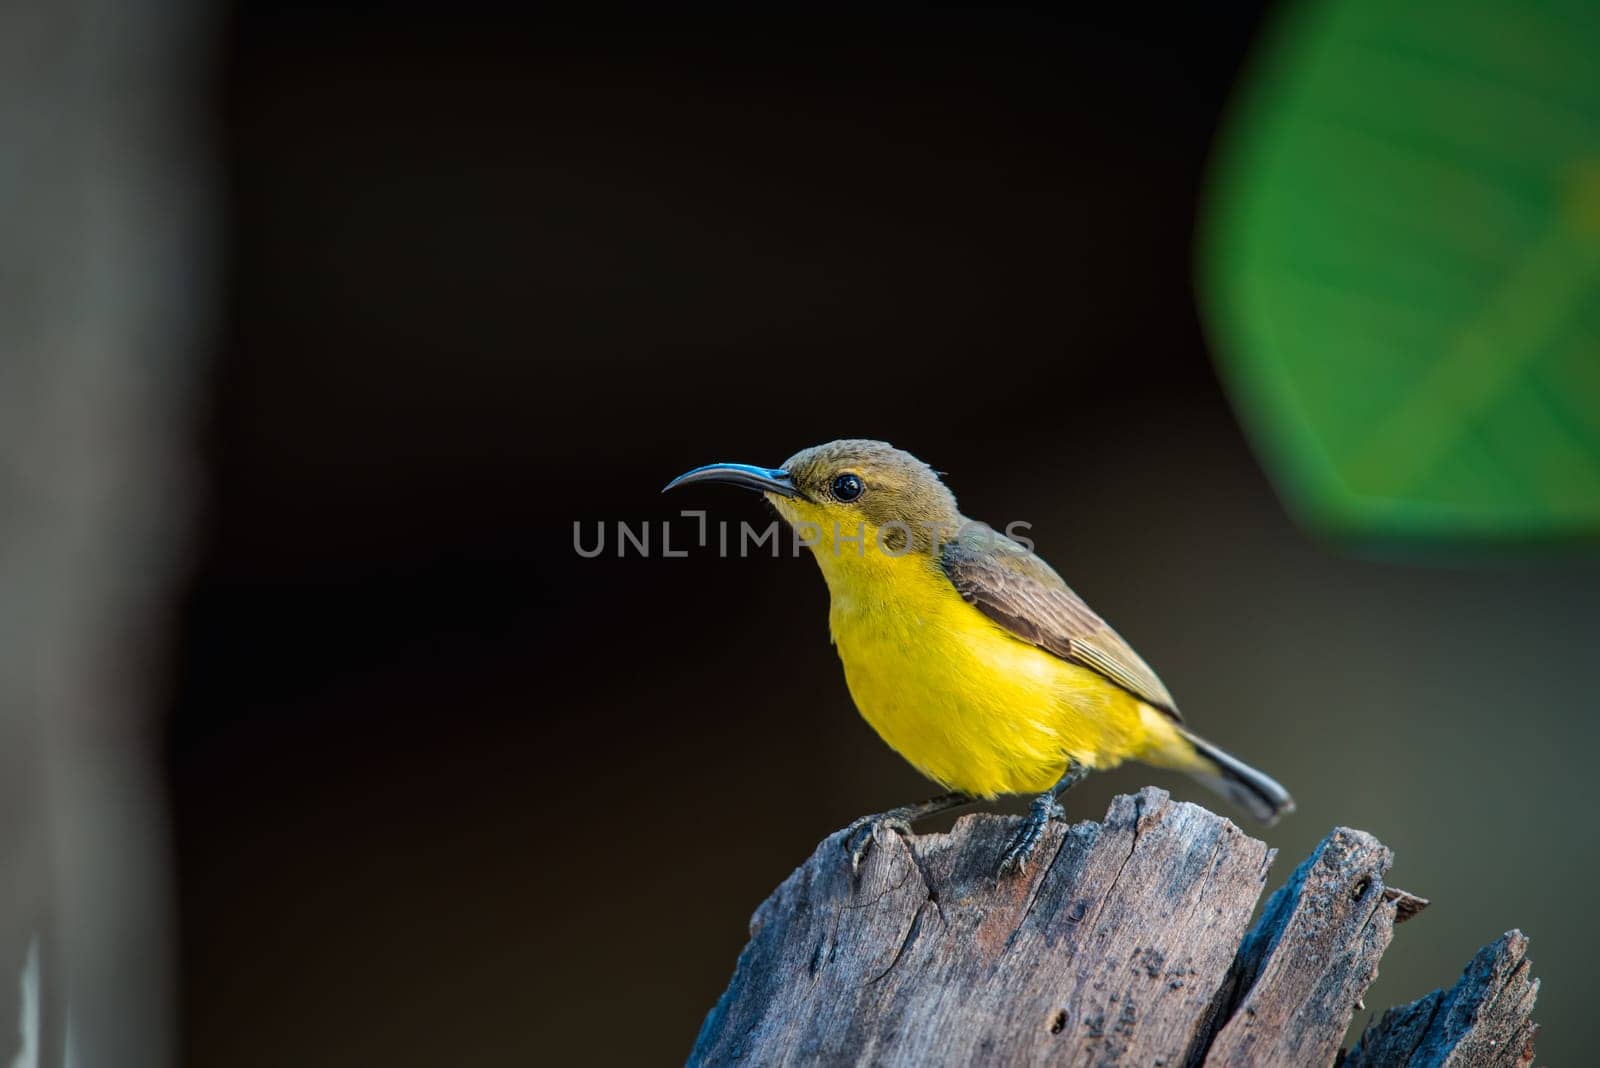 Bird (Olive-backed sunbird, Yellow-bellied sunbird) female yellow color perched on a tree in a nature wild